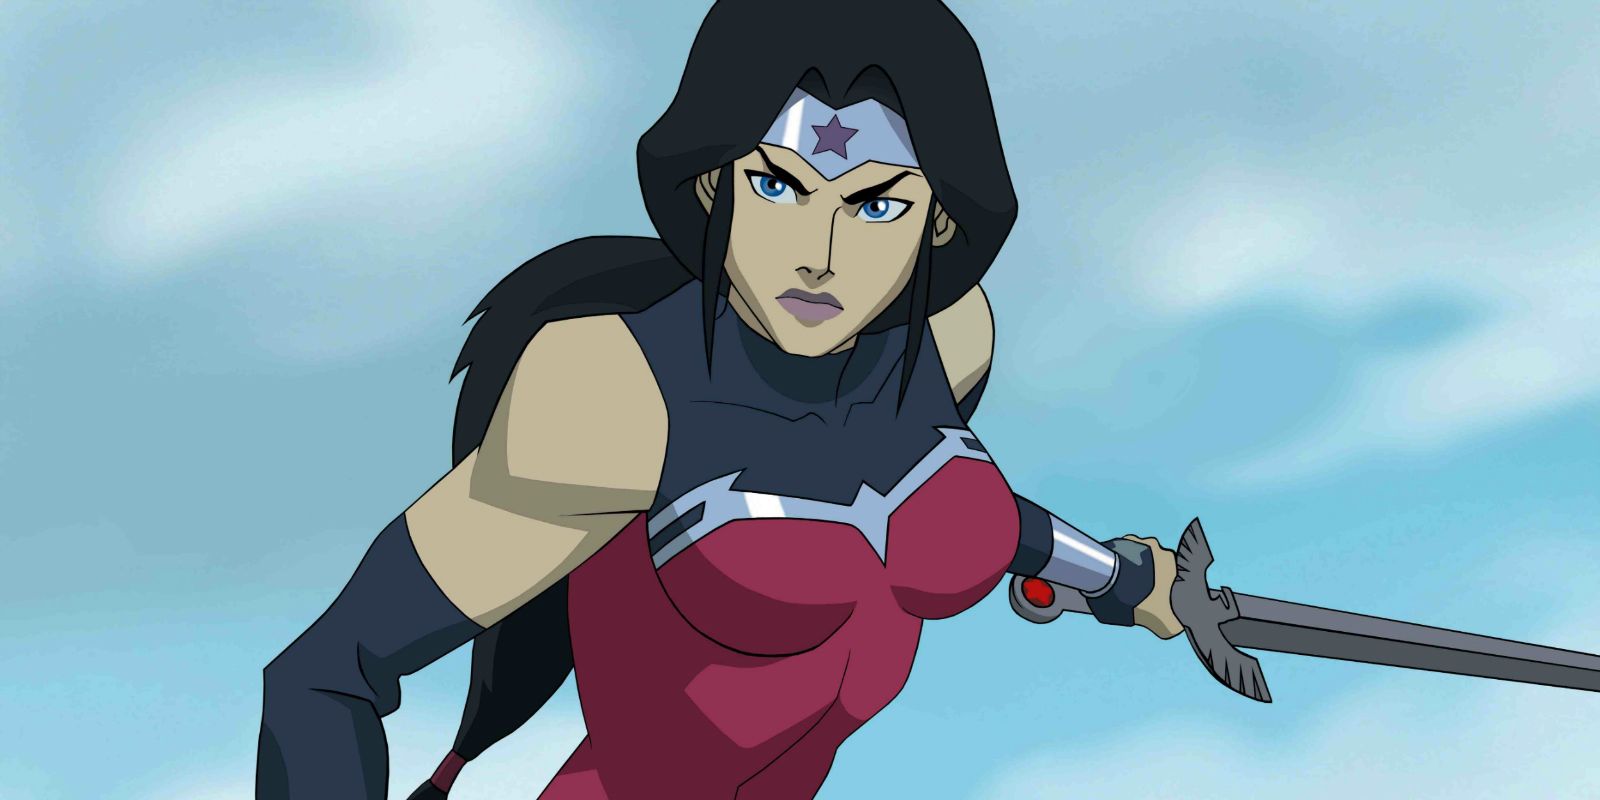 Wonder Woman holding a sword in Justice League War